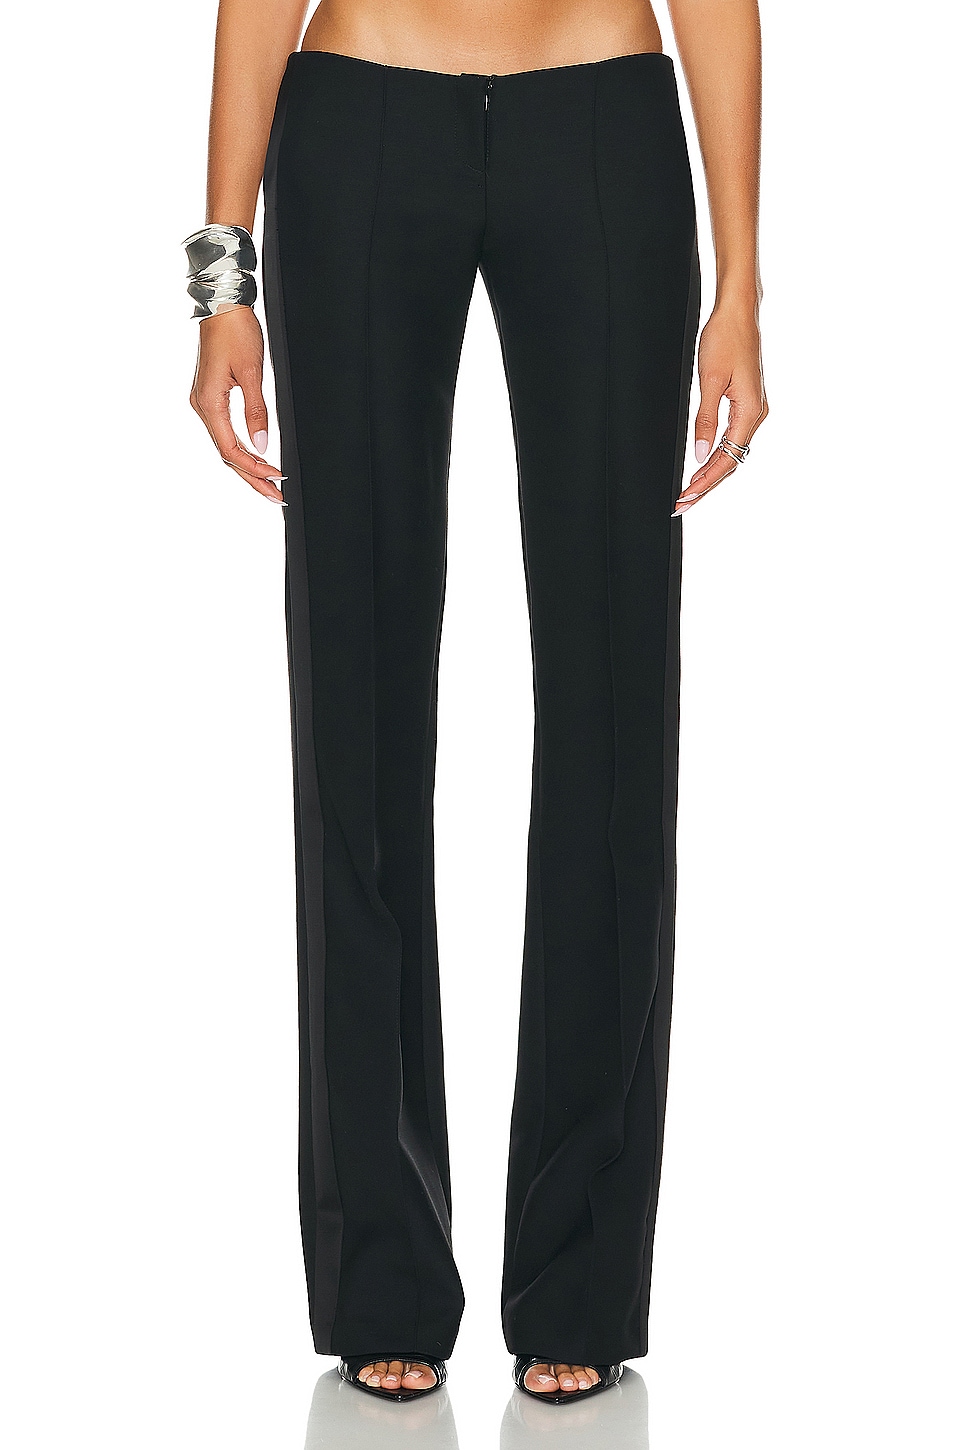 Image 1 of LaQuan Smith Low Rise Tuxedo Trouser in Black